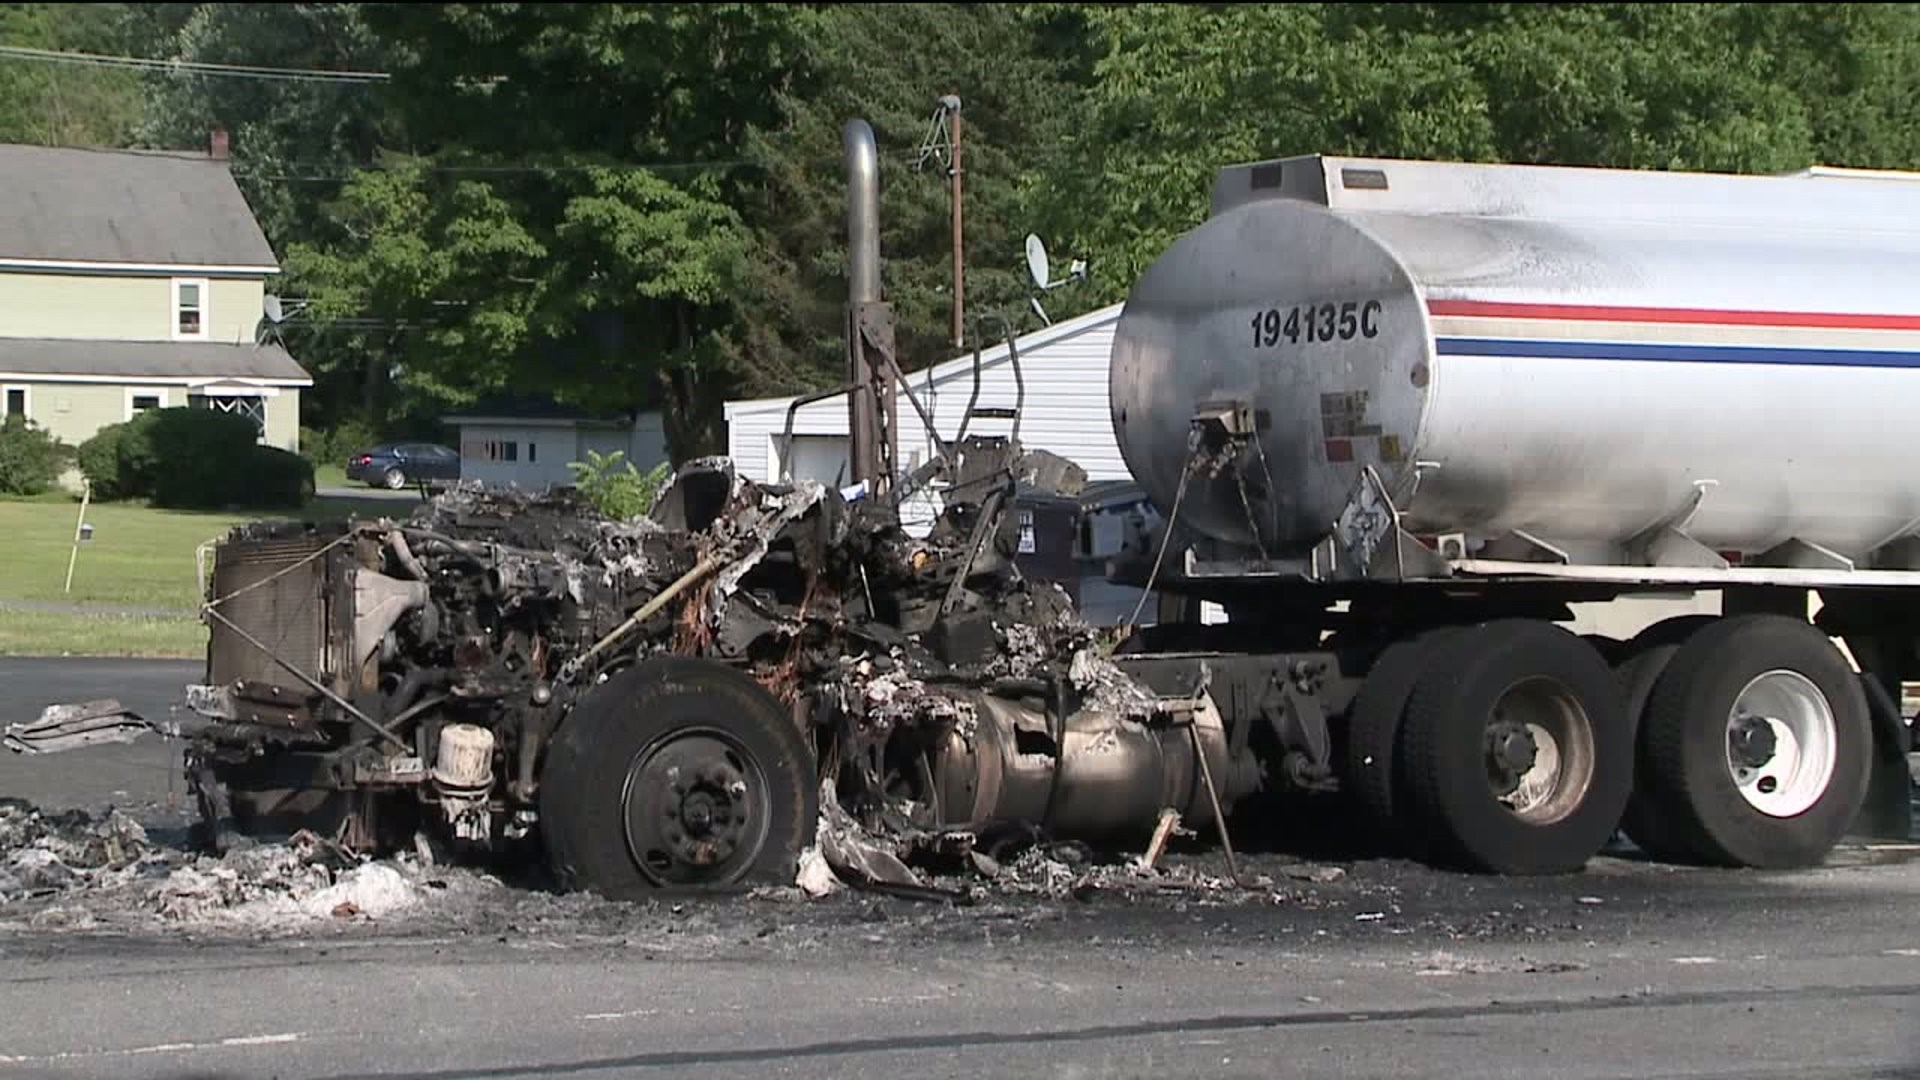 Truck Fire Slows Traffic in Part of Poconos